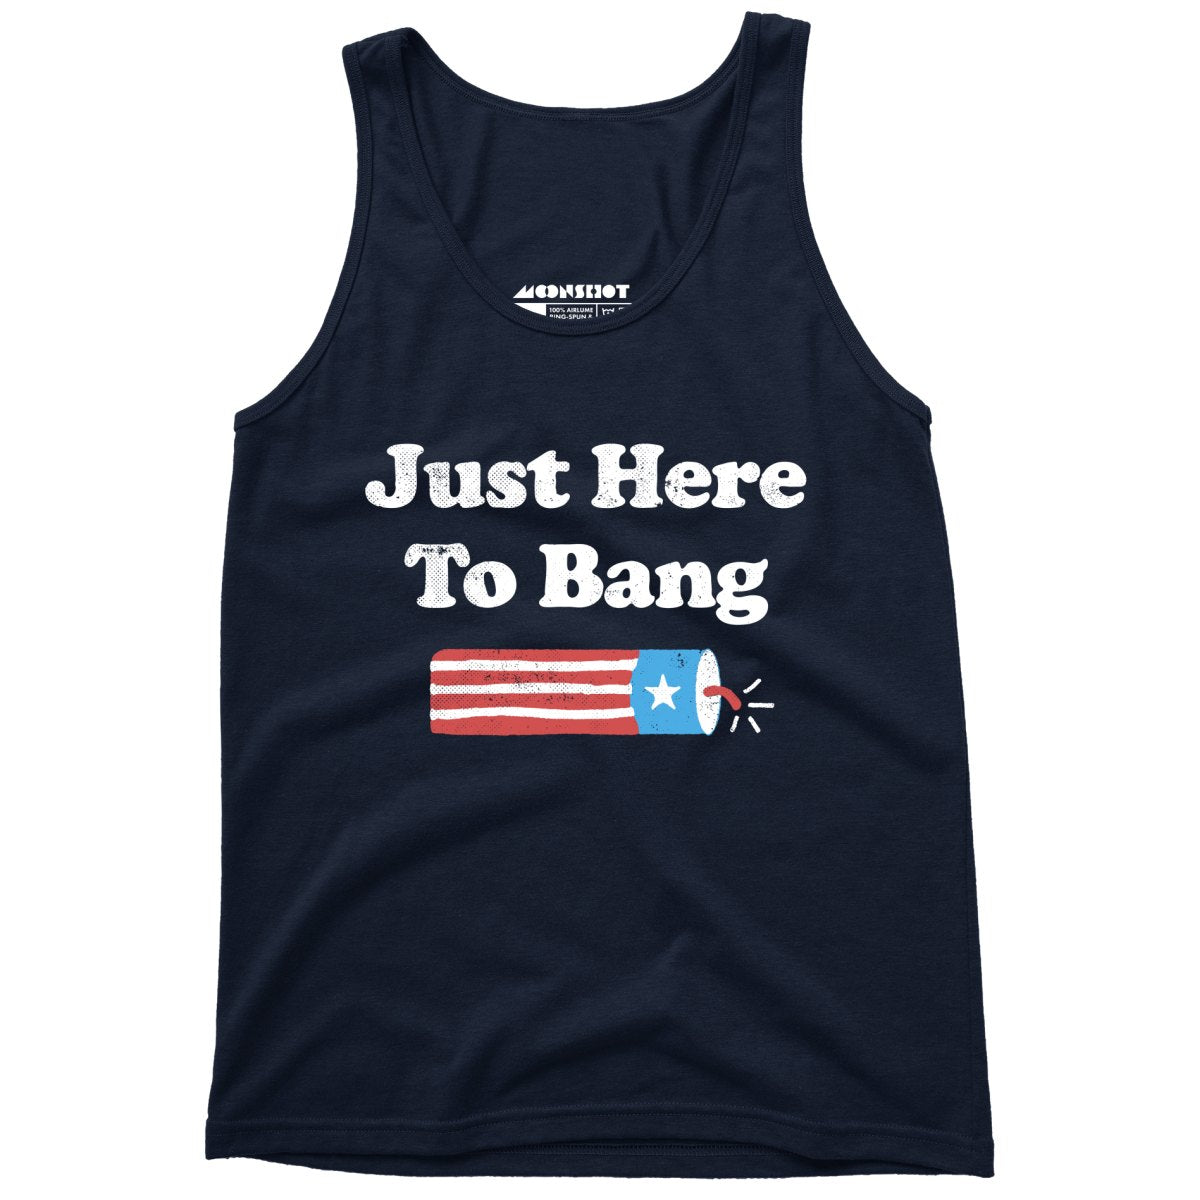 Just Here to Bang - Unisex Tank Top